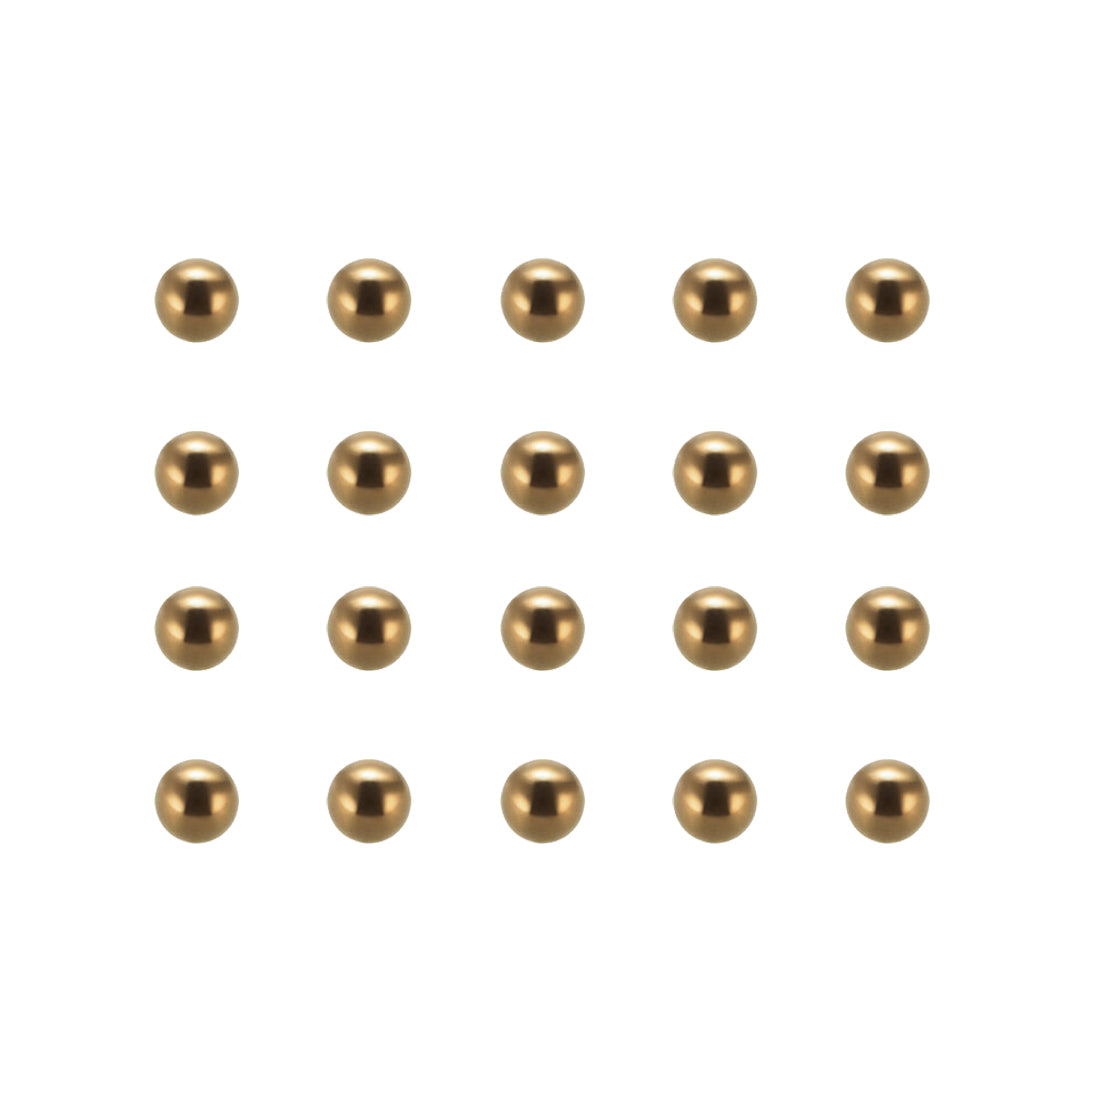 Uxcell Uxcell 2mm Precision Solid Brass Bearing Balls 100pcs